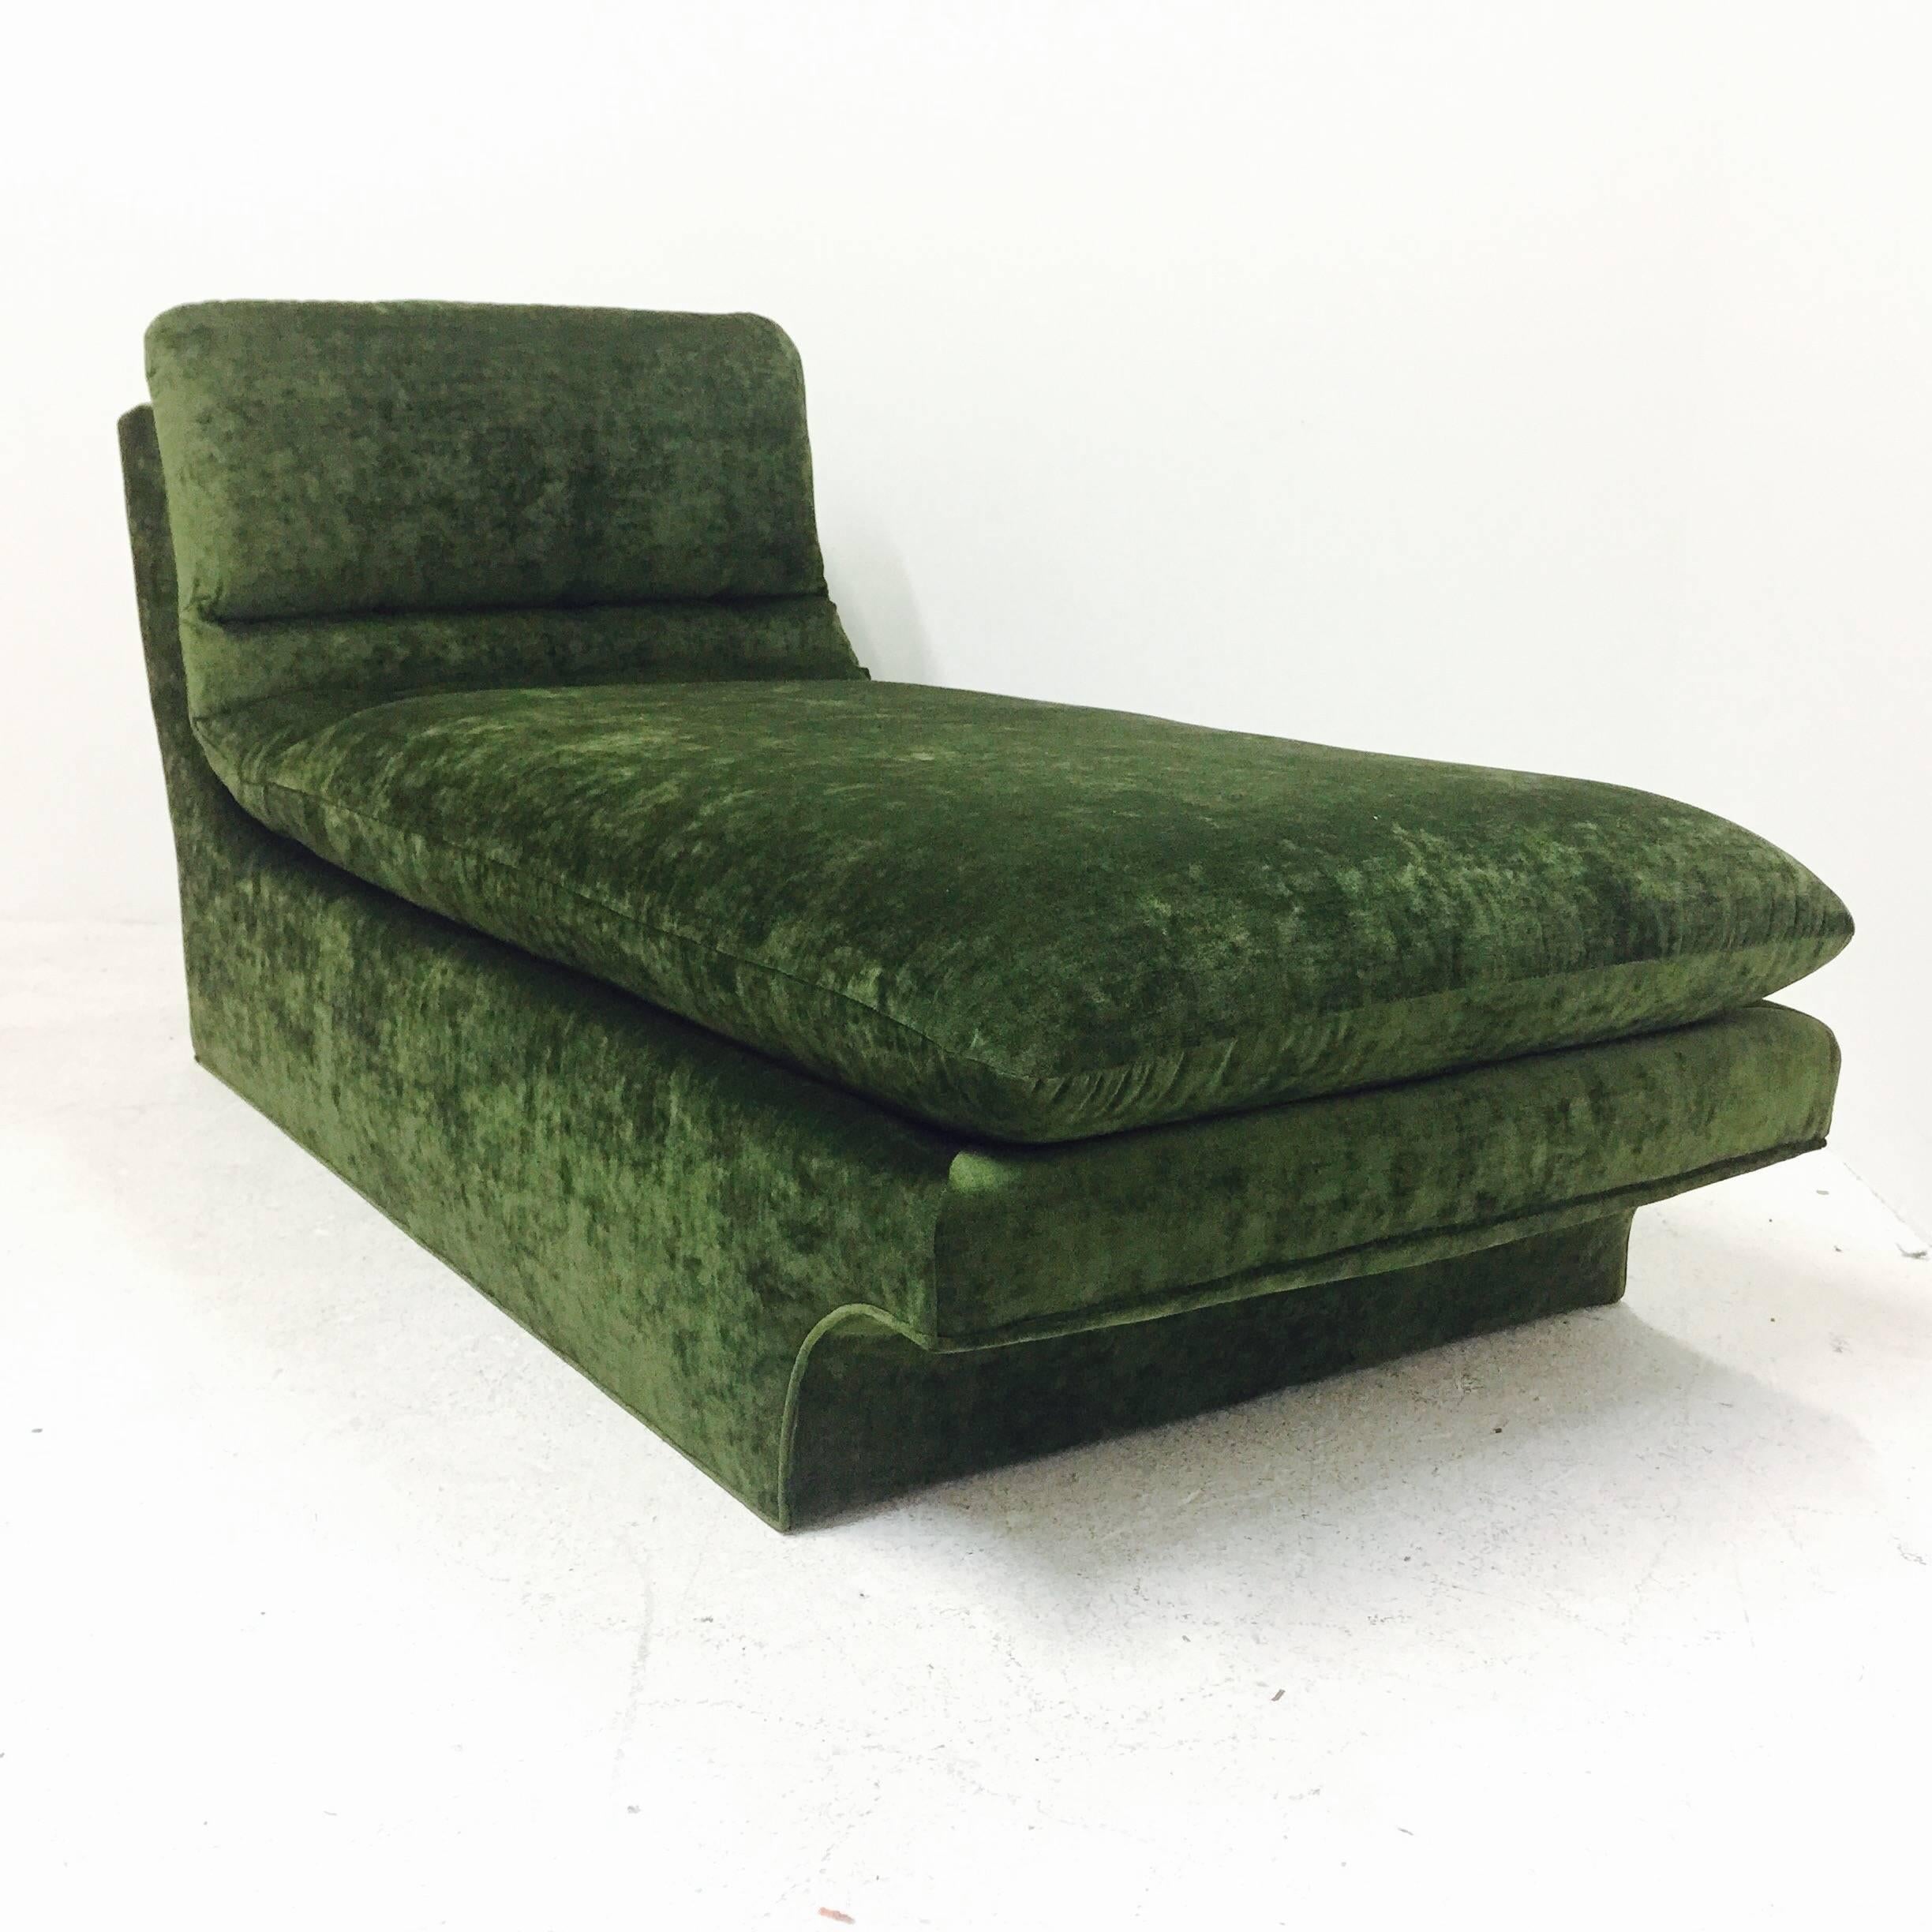 Newly upholstered 1970s chaise lounge designed in the style Vladimir Kagan. Chaise is comfy as well as very sculptural in design. In excellent condition.

Dimensions: 30